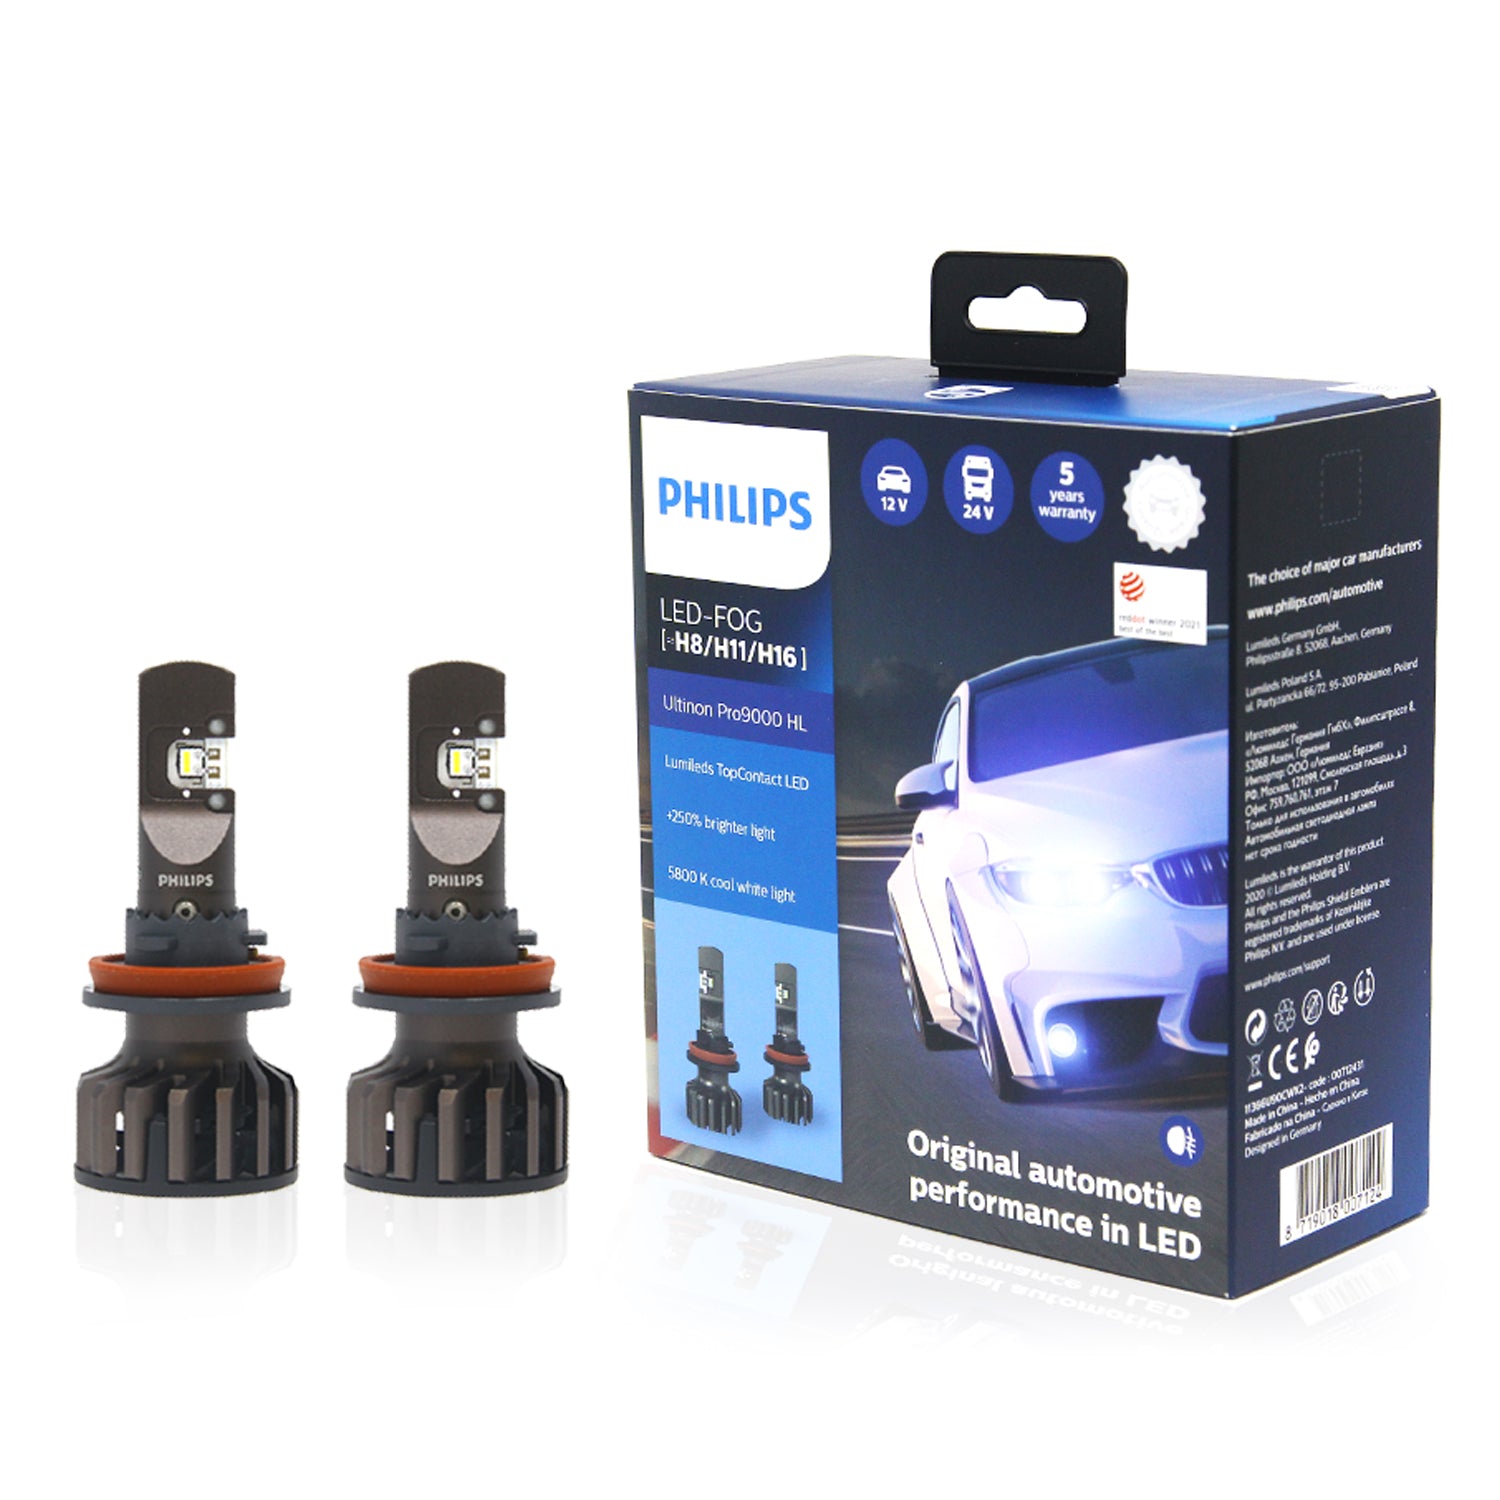 Tradition Motherland Grøn Phillips Ultinon Pro9000 | H8, H16 & H11 LED | HID Concept – HID CONCEPT